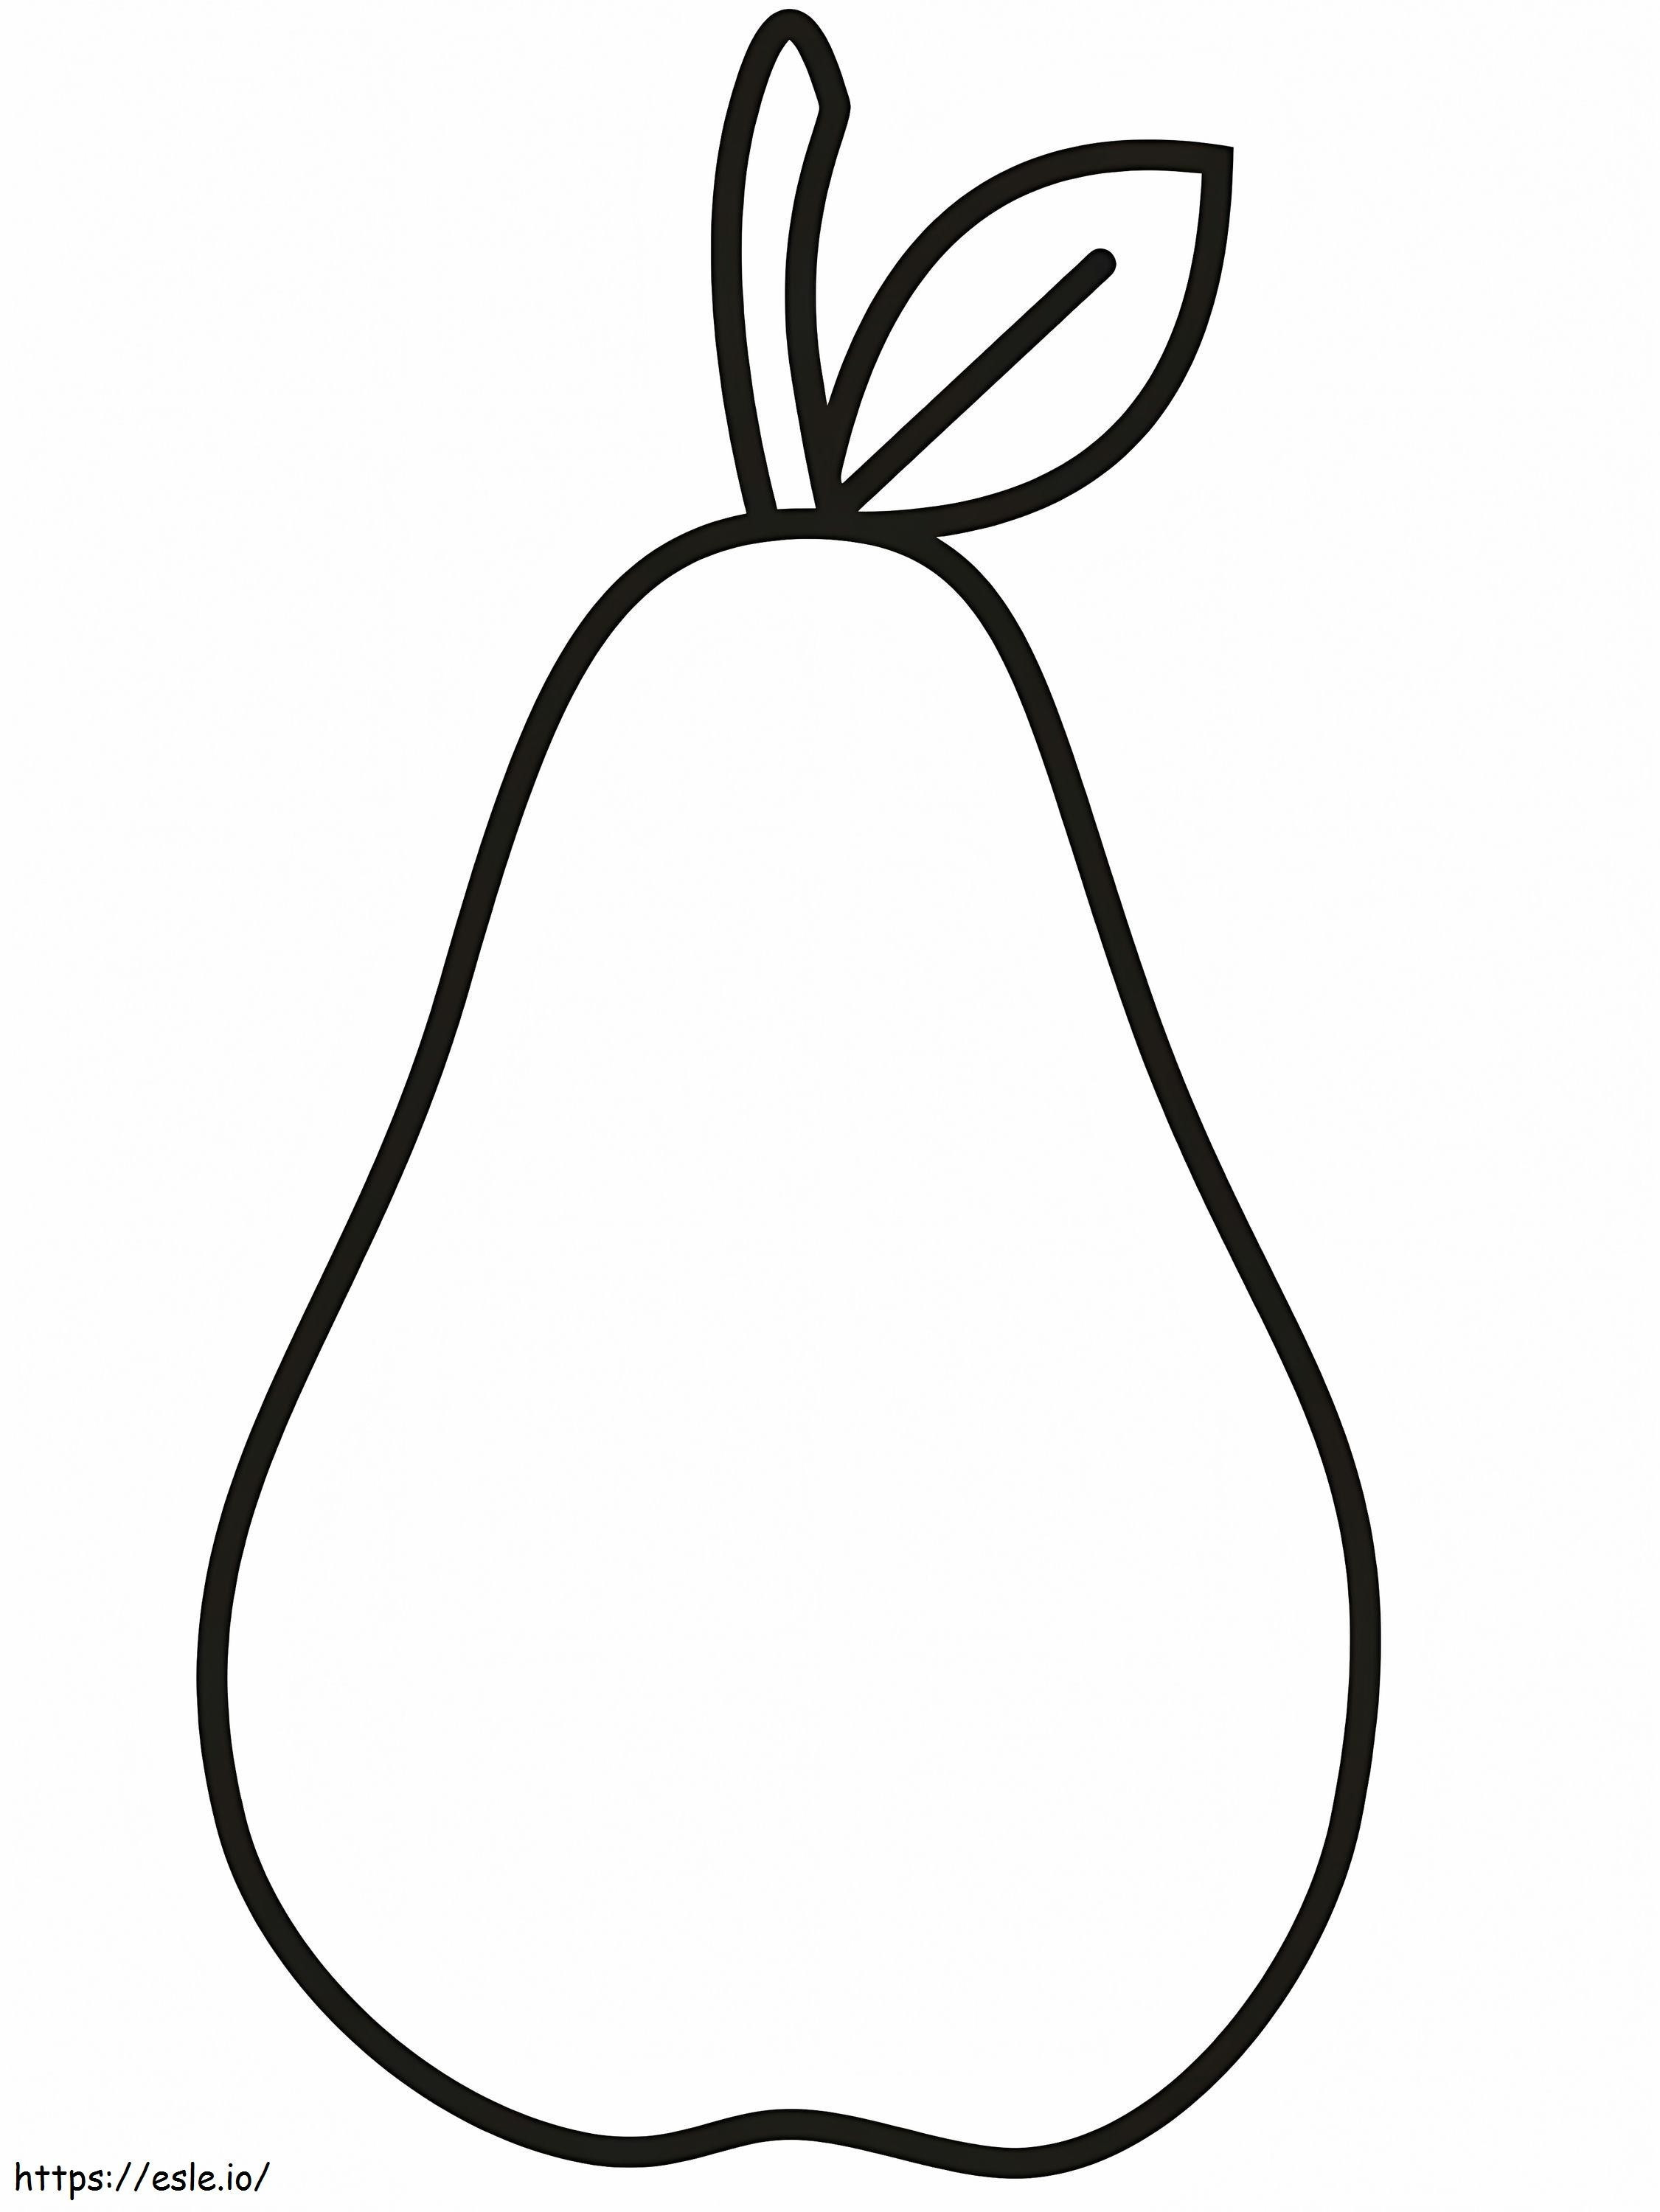 Easy Pear coloring page